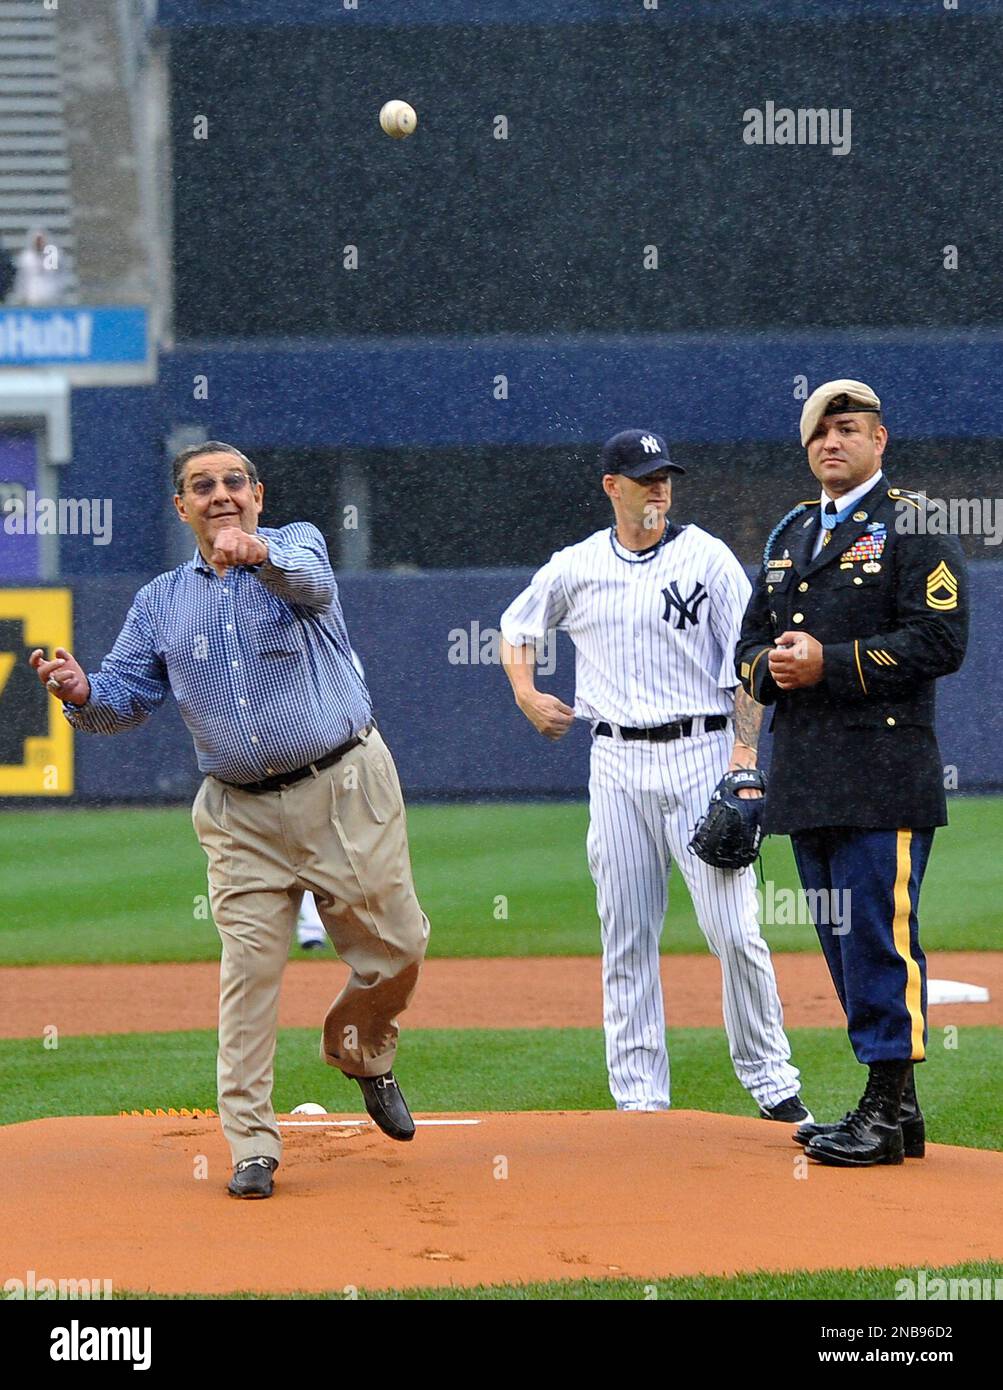 Congressional Medal of Honor awardee Sgt. 1st Class Leroy Arthur Petry  during ceremonies to honor the 10-year anniversary of September 11, 2001  before the baseball game between the Yankees and the Baltimore